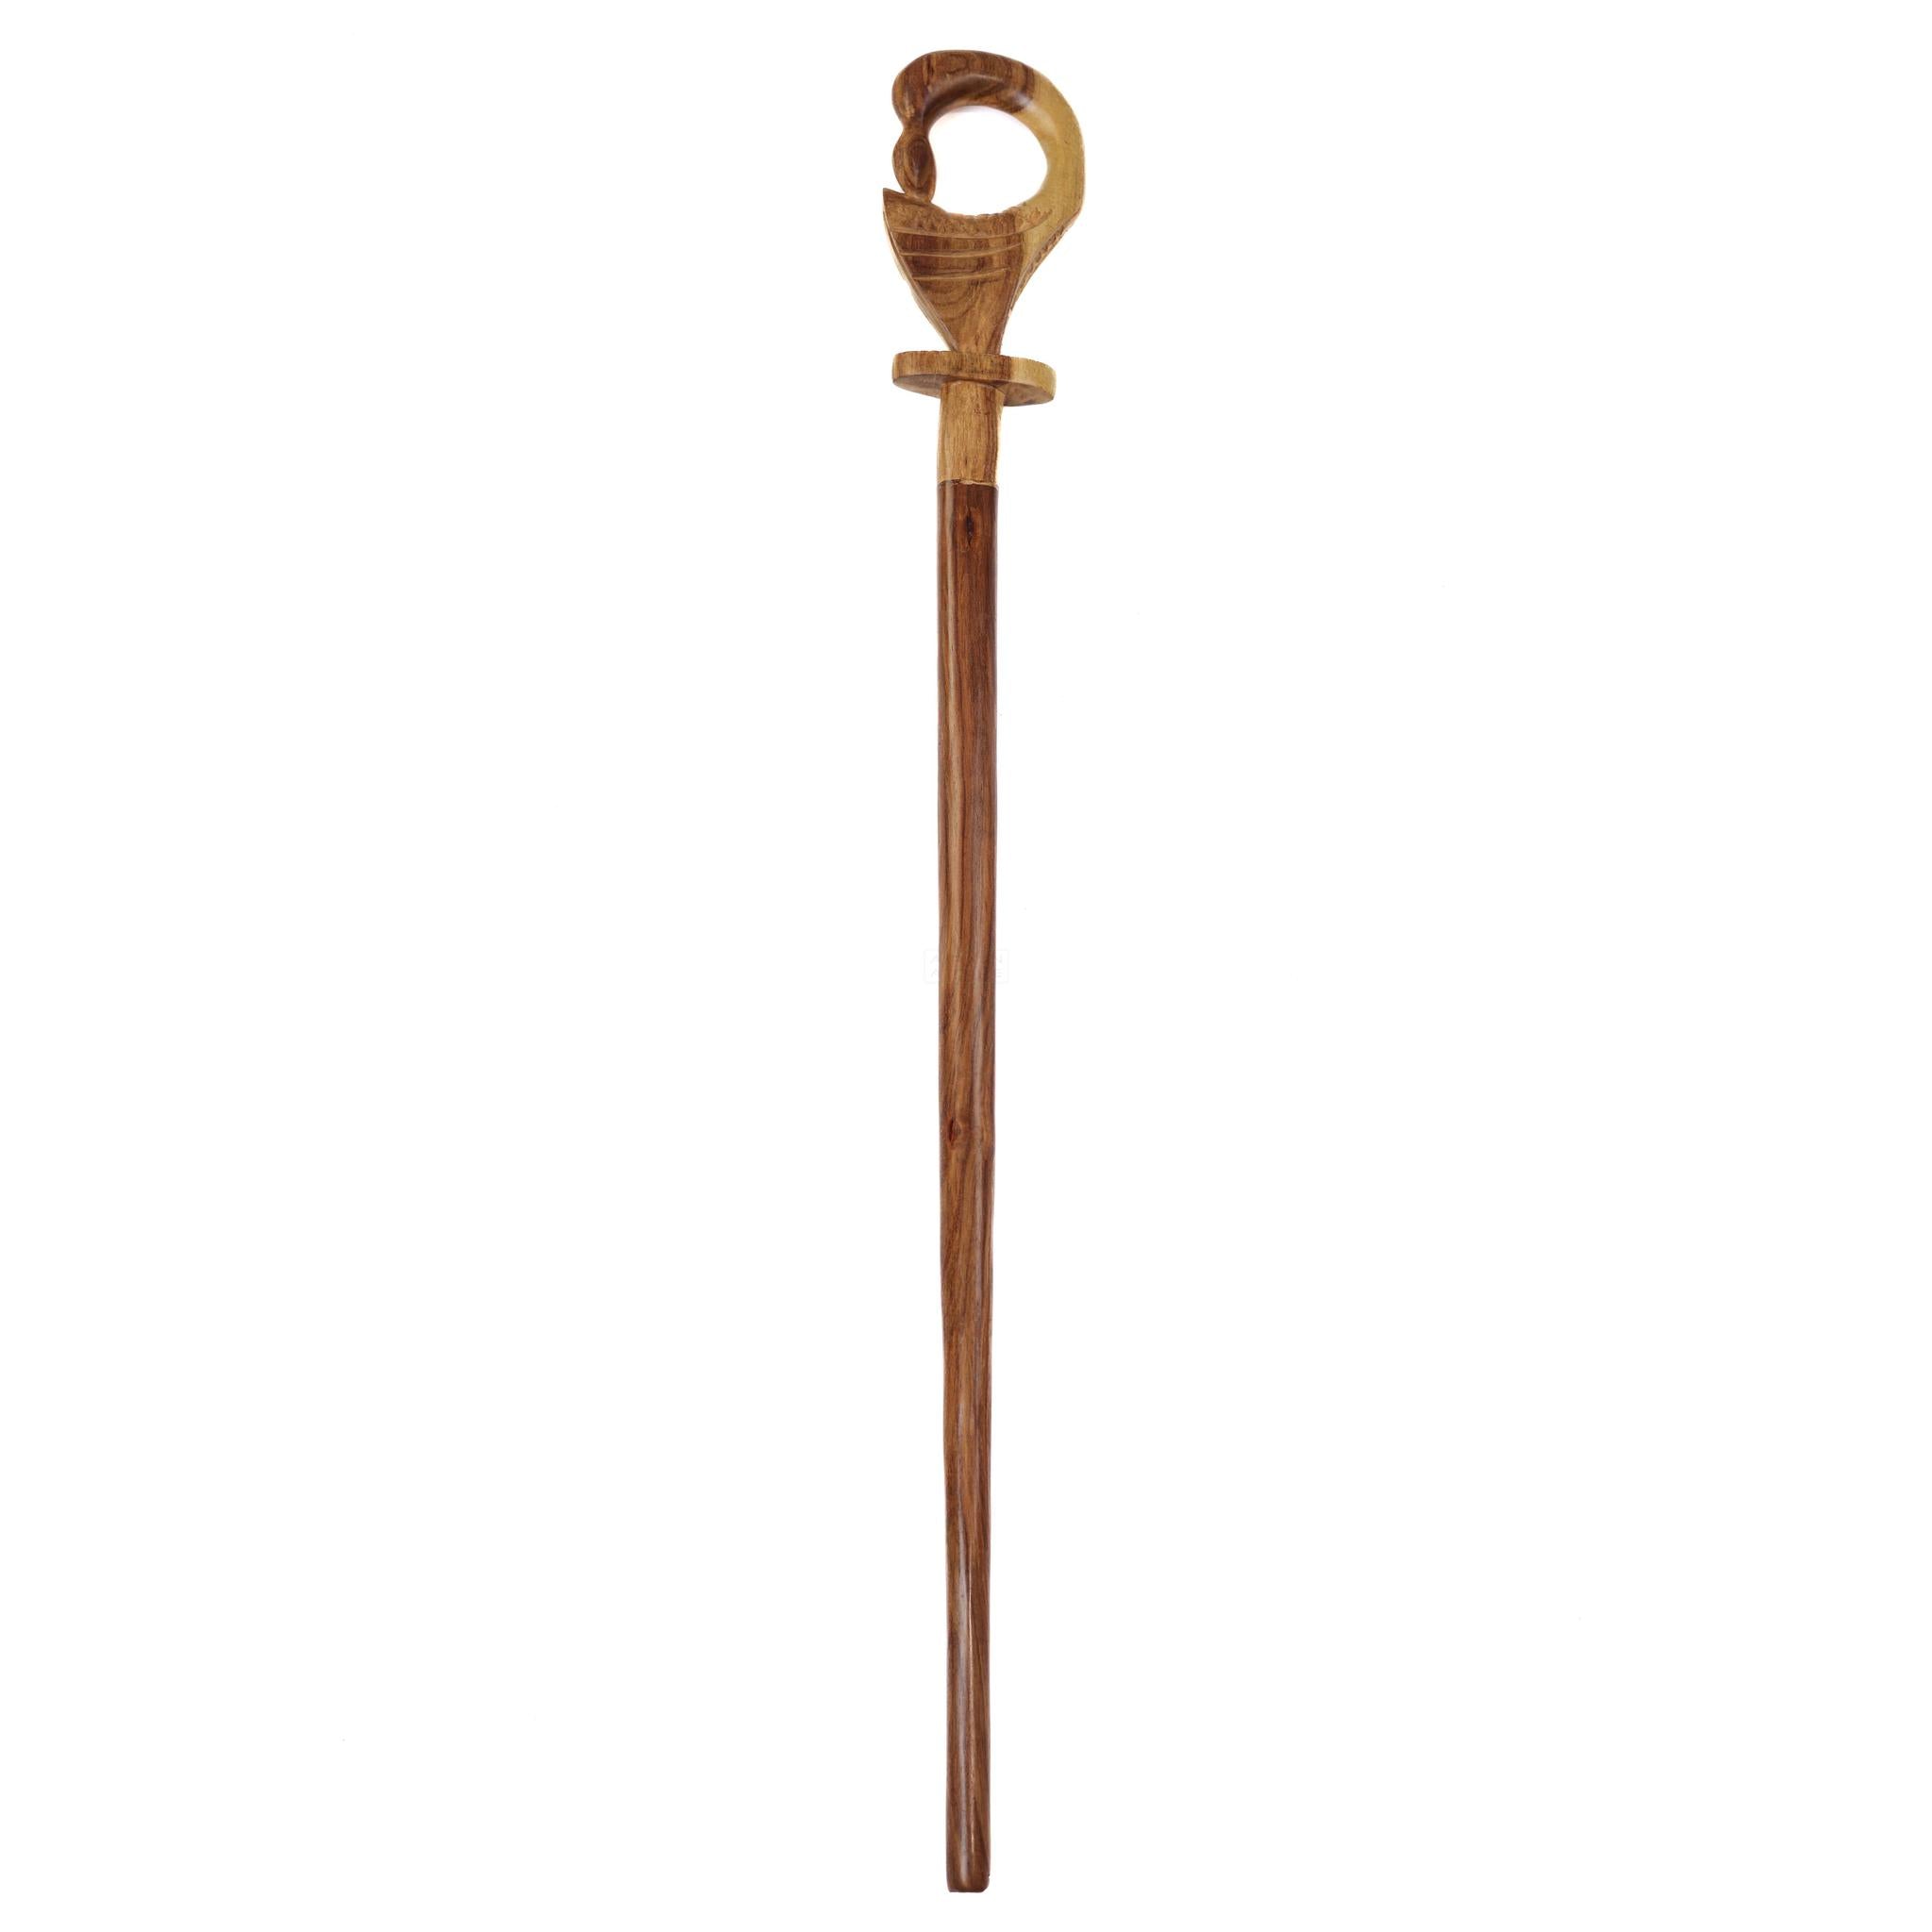 Hand-Carved Ghanaian Walking Stick Features Sankofa Symbol for Strength and Heritage